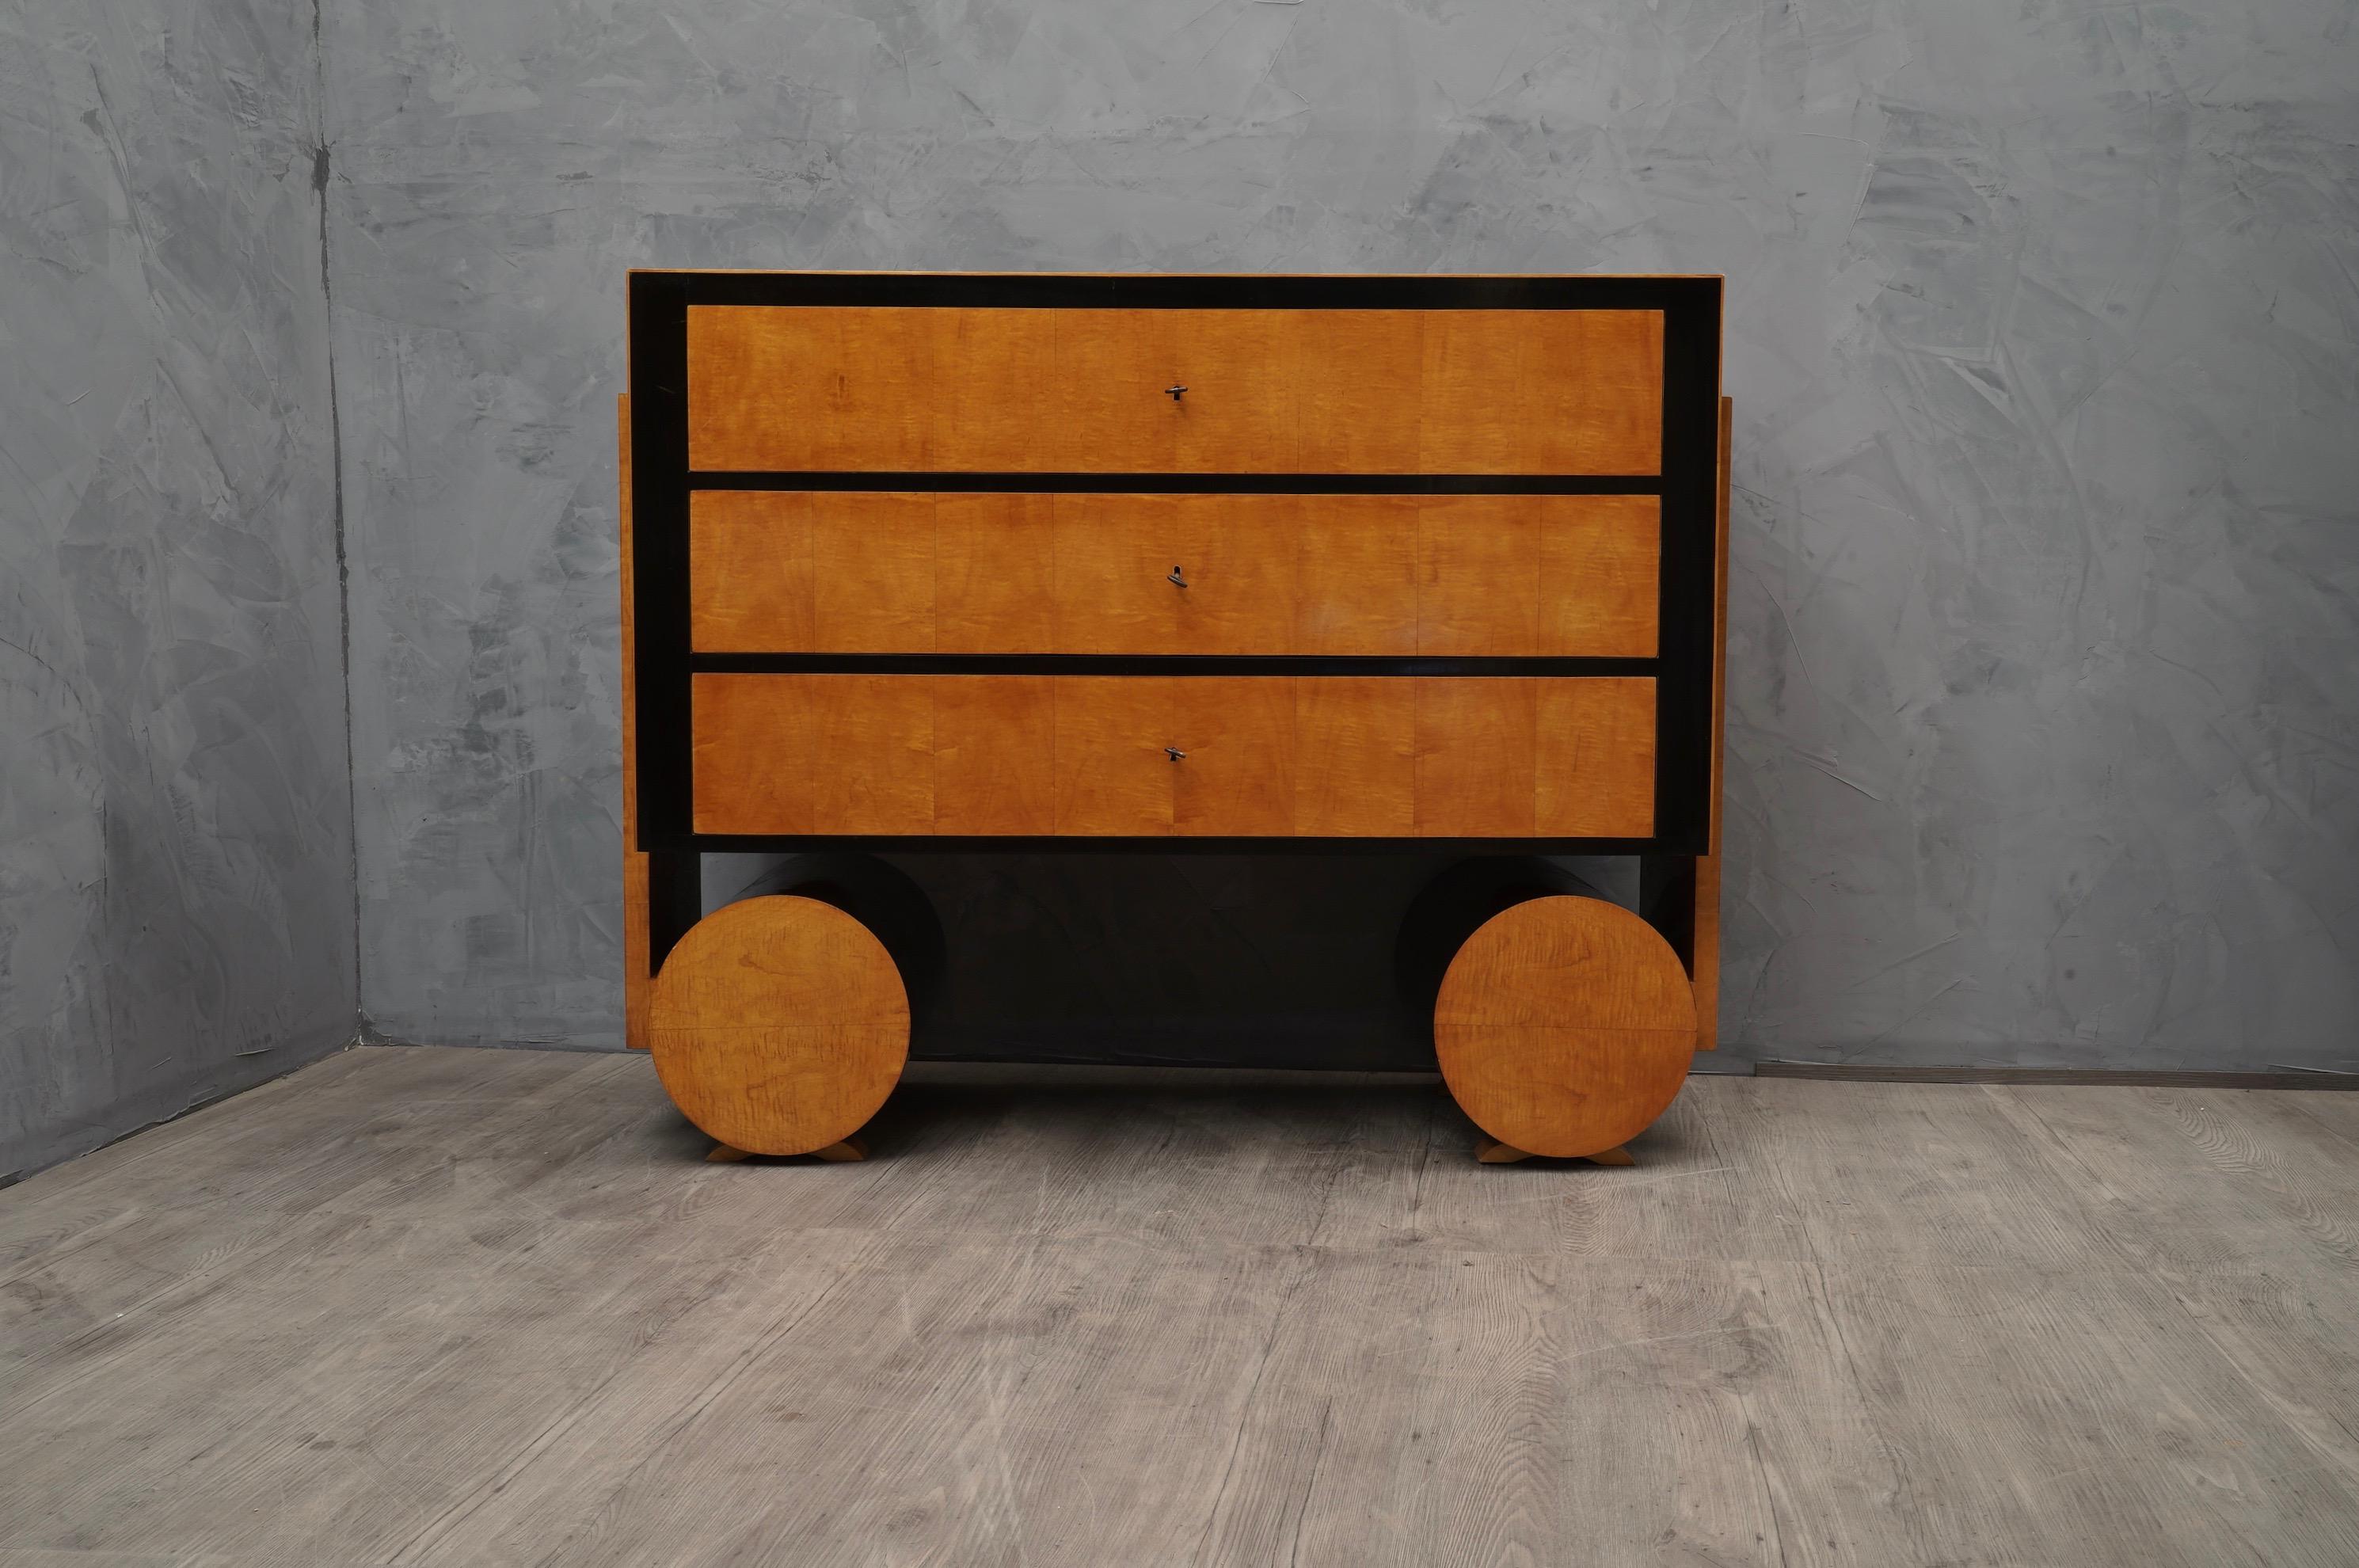 Beautiful dresser from the design very rational but very impact.

All veneered in maple wood, with parts polished in black shellac. Two beautiful round legs support three large drawers. It is very nice the combination of the lacquered black part and